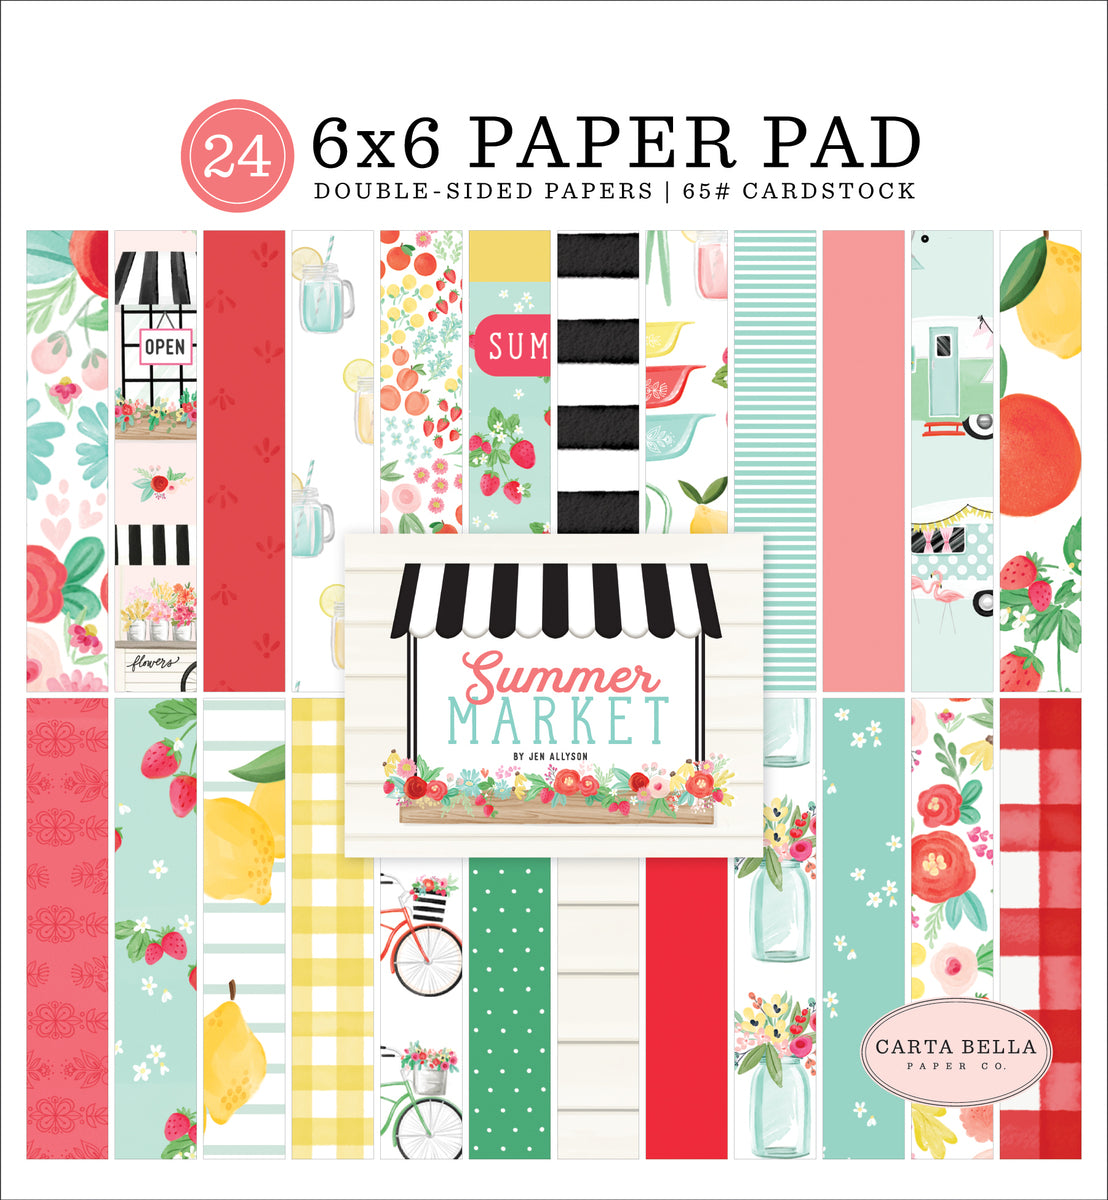 Summer Market - 6x6 paper pad with 24 double-sided sheets - Carta Bella Paper